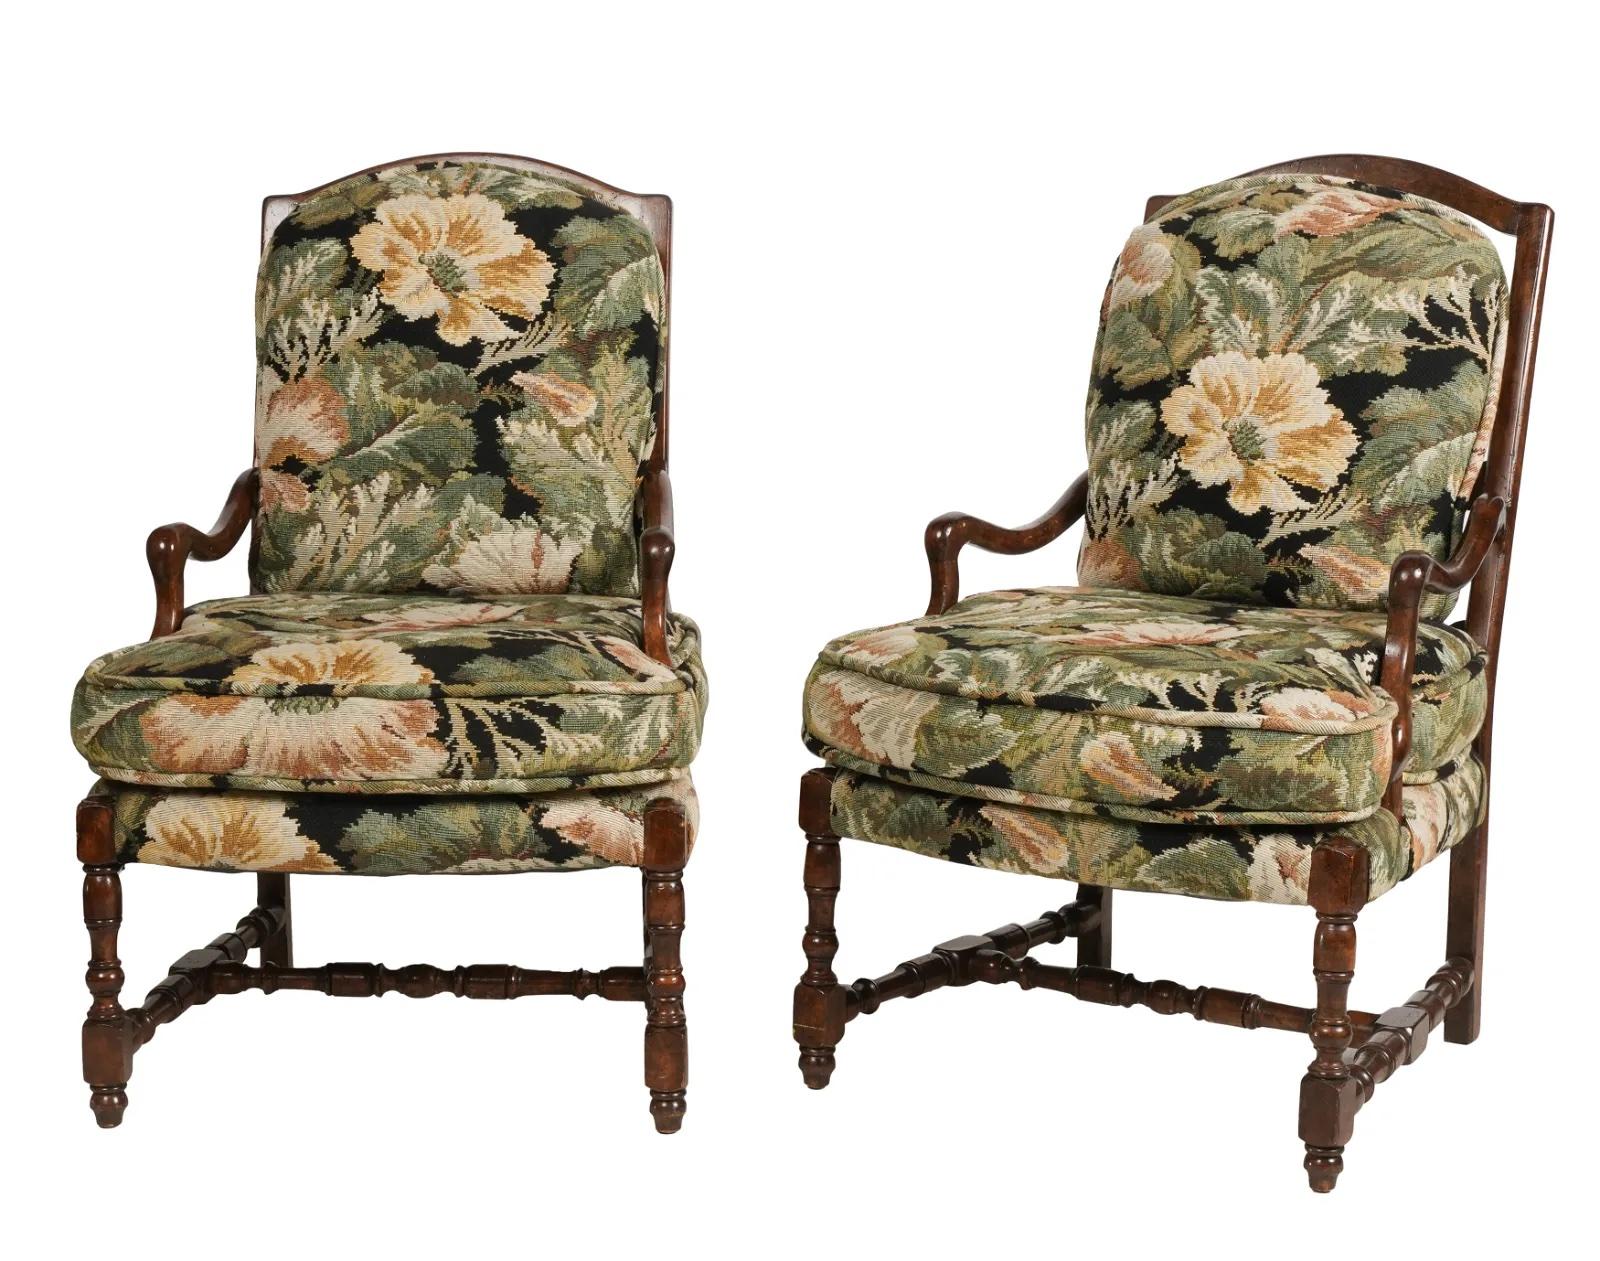 Pair of Late 20th Century French Provincial Style Upholstered Arm Chairs w/ faux needlepoint upholstery in good condition. Dimensions: 40 1/2